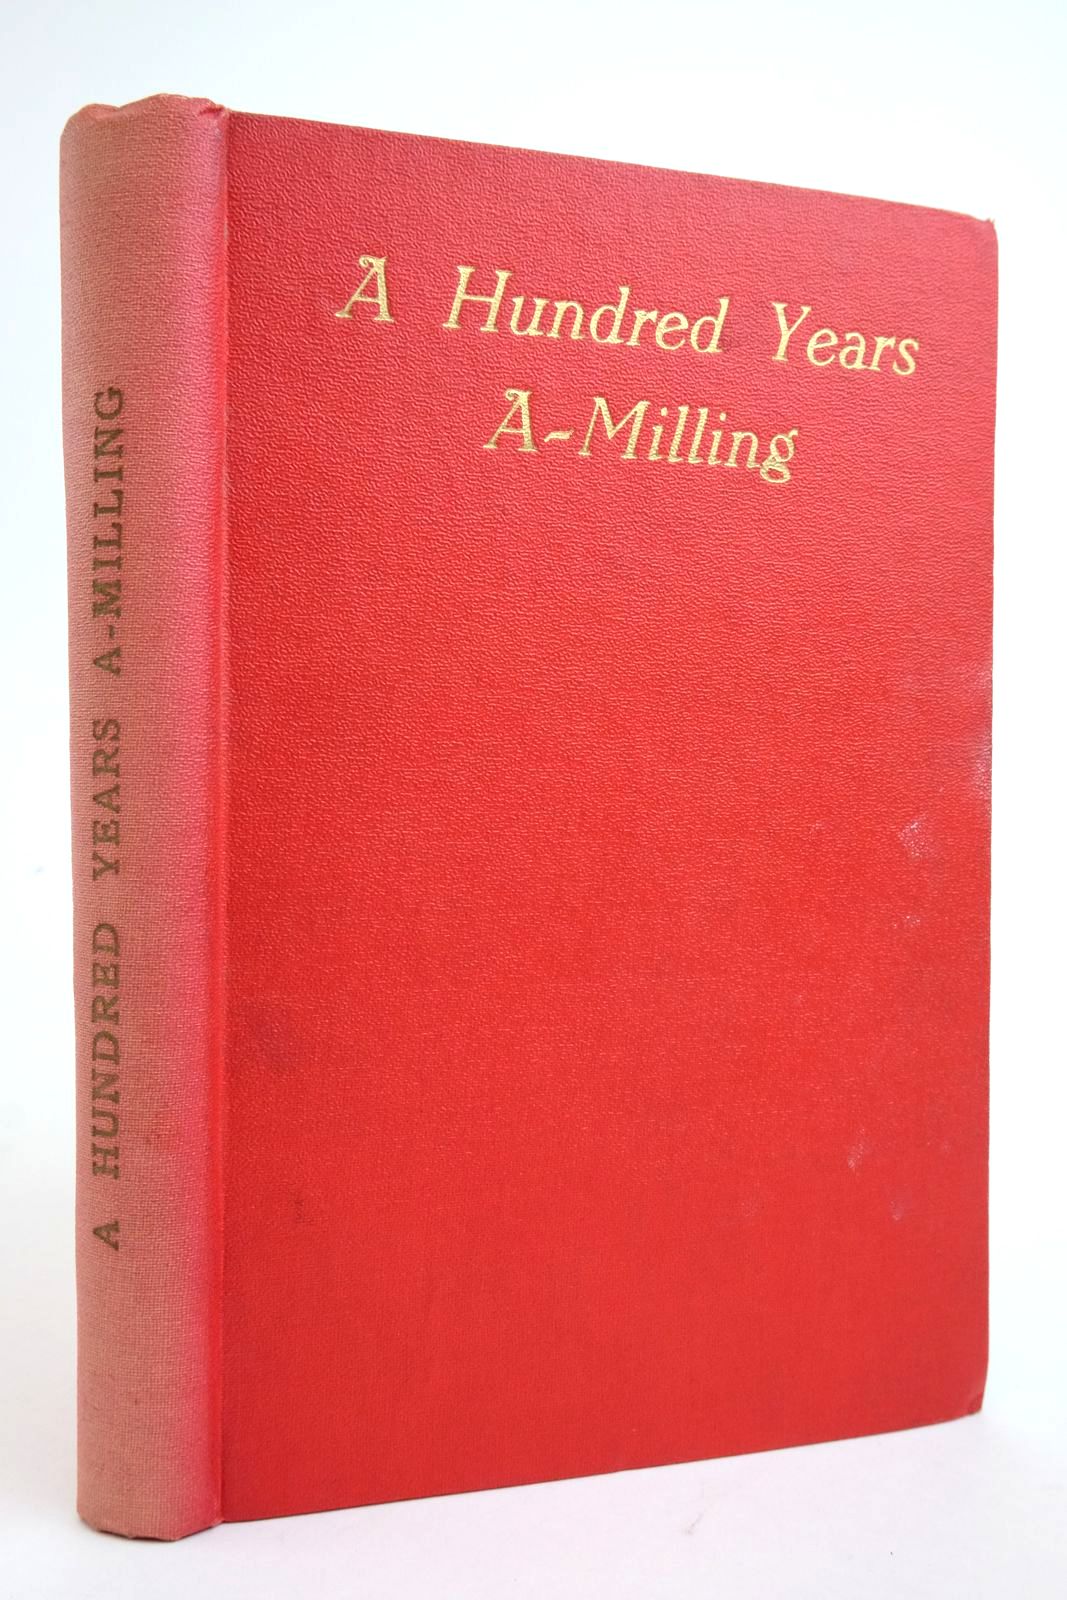 Photo of A HUNDRED YEARS A-MILLING: COMMEMORATING AN ULSTER MILL CENTENARY- Stock Number: 2135961